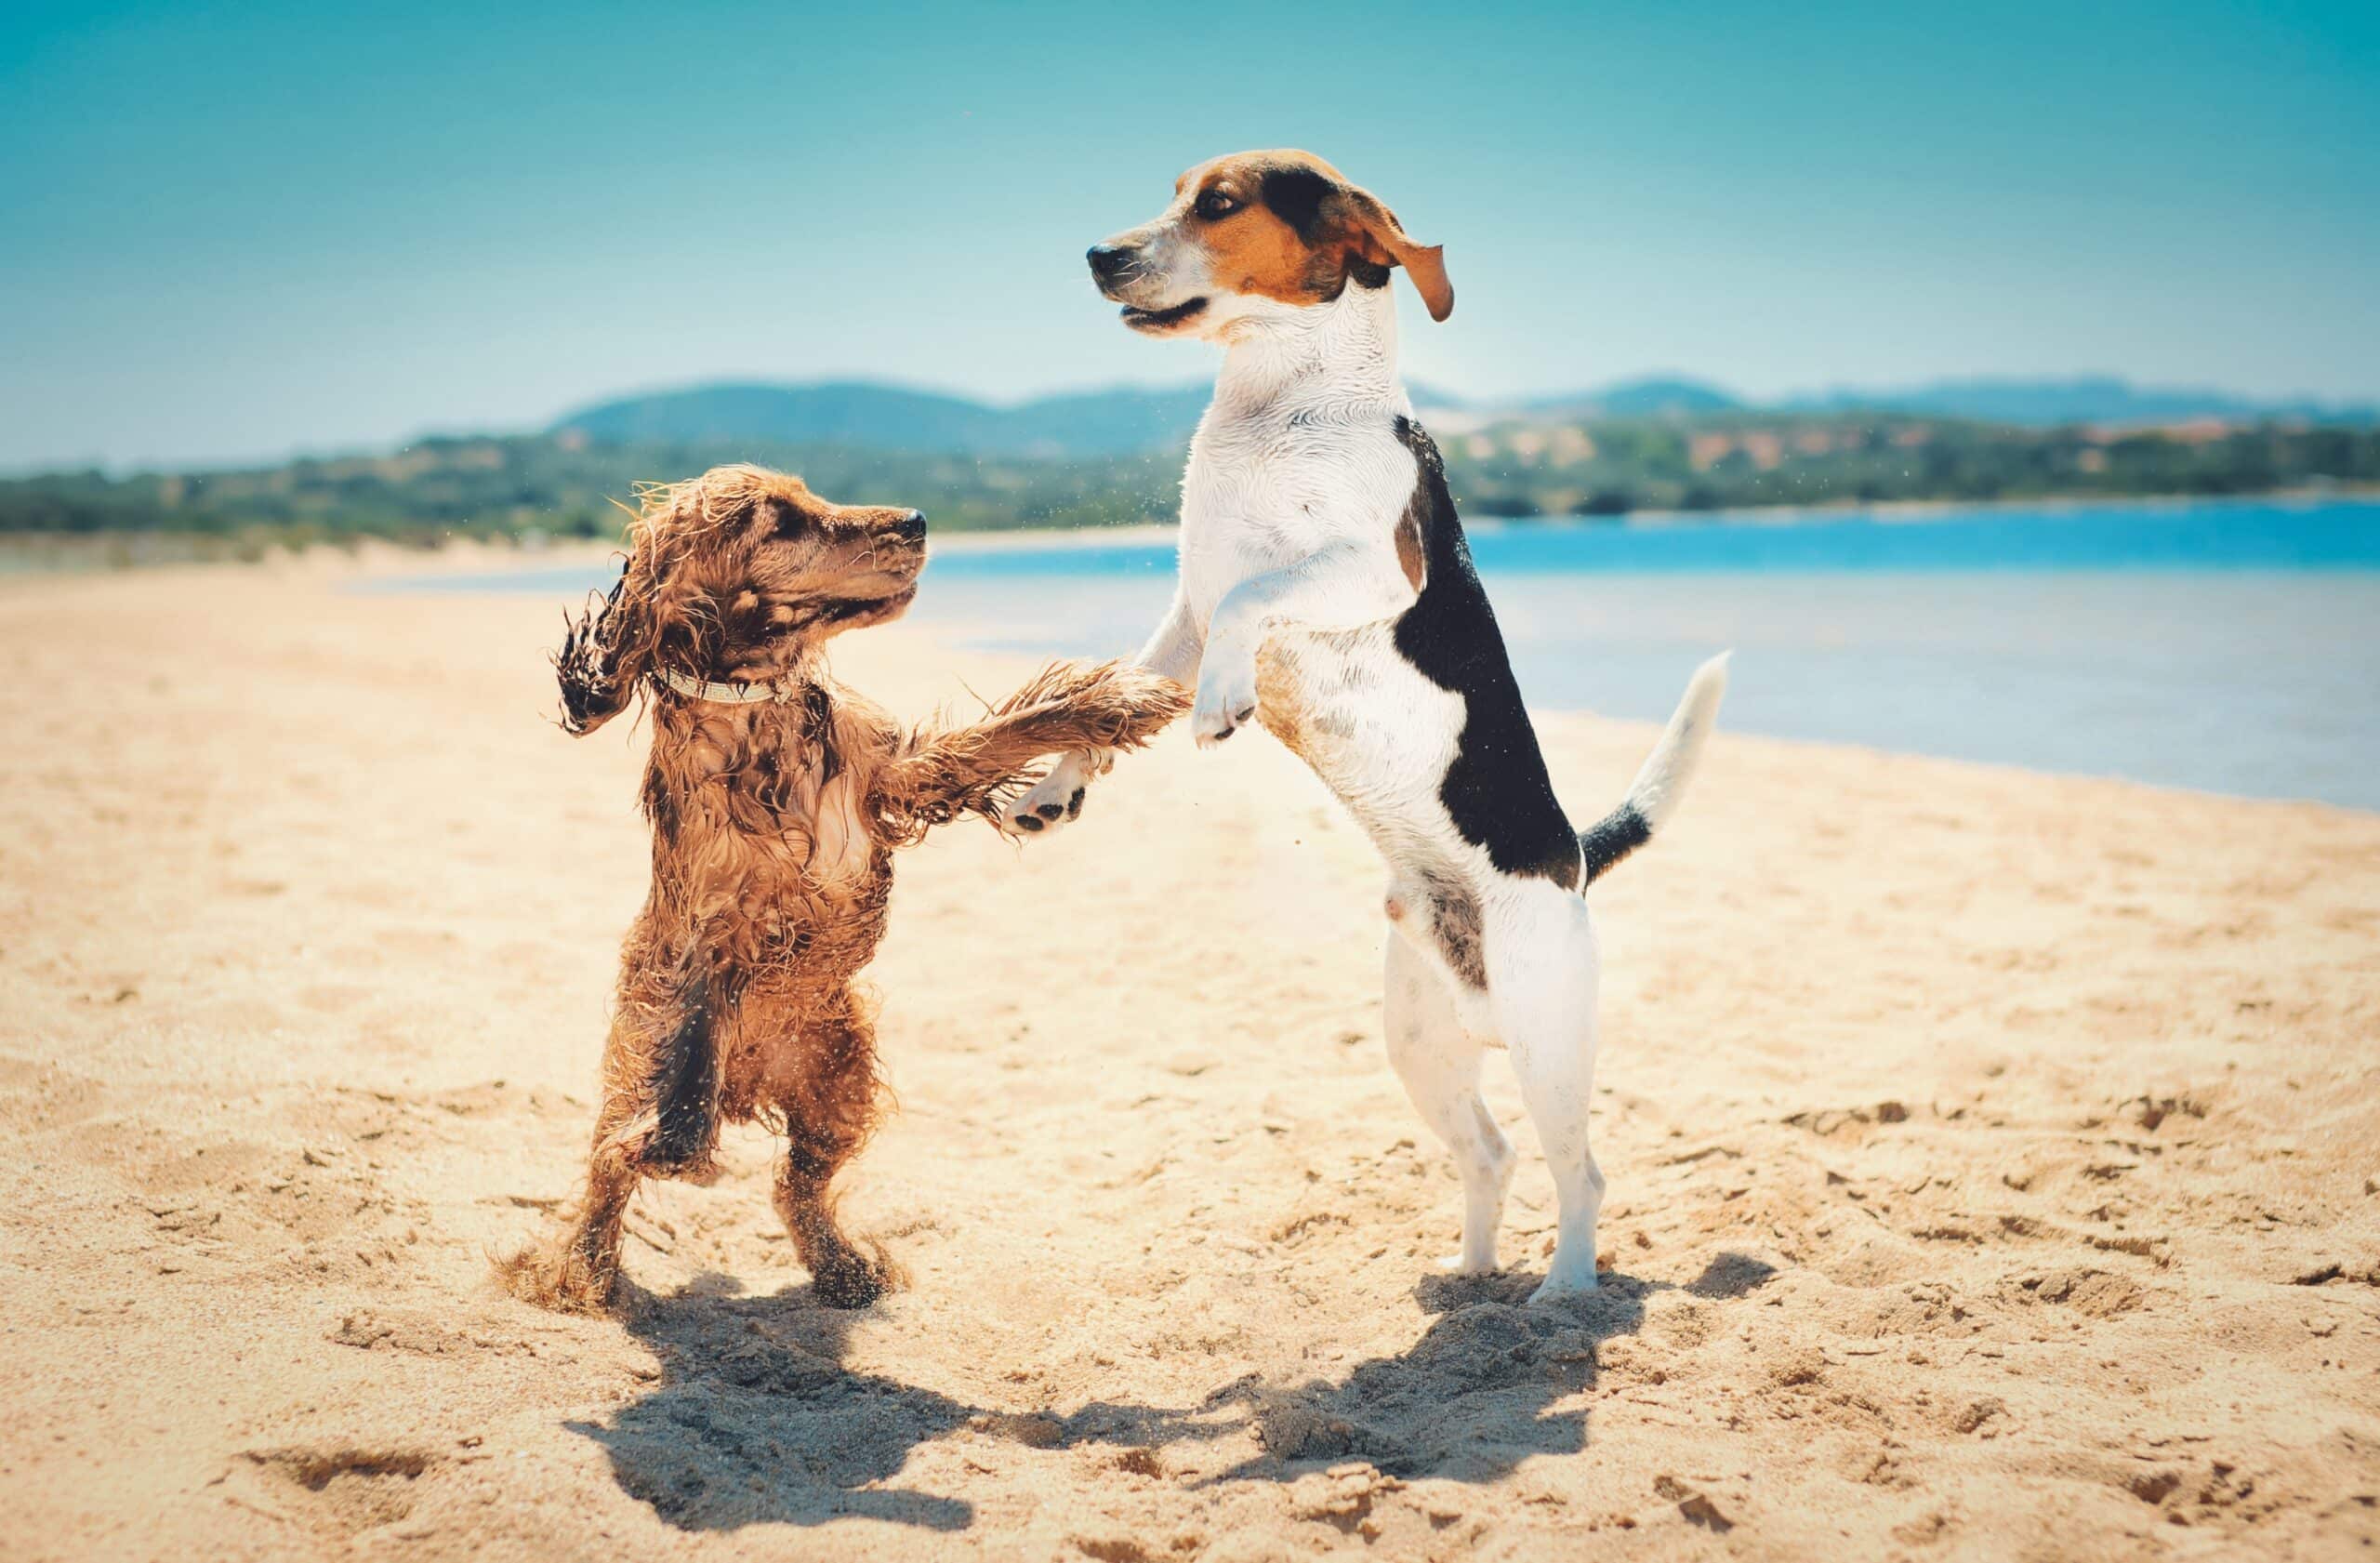 Beautiful shot of two dogs standing upright and dancing together on a beach